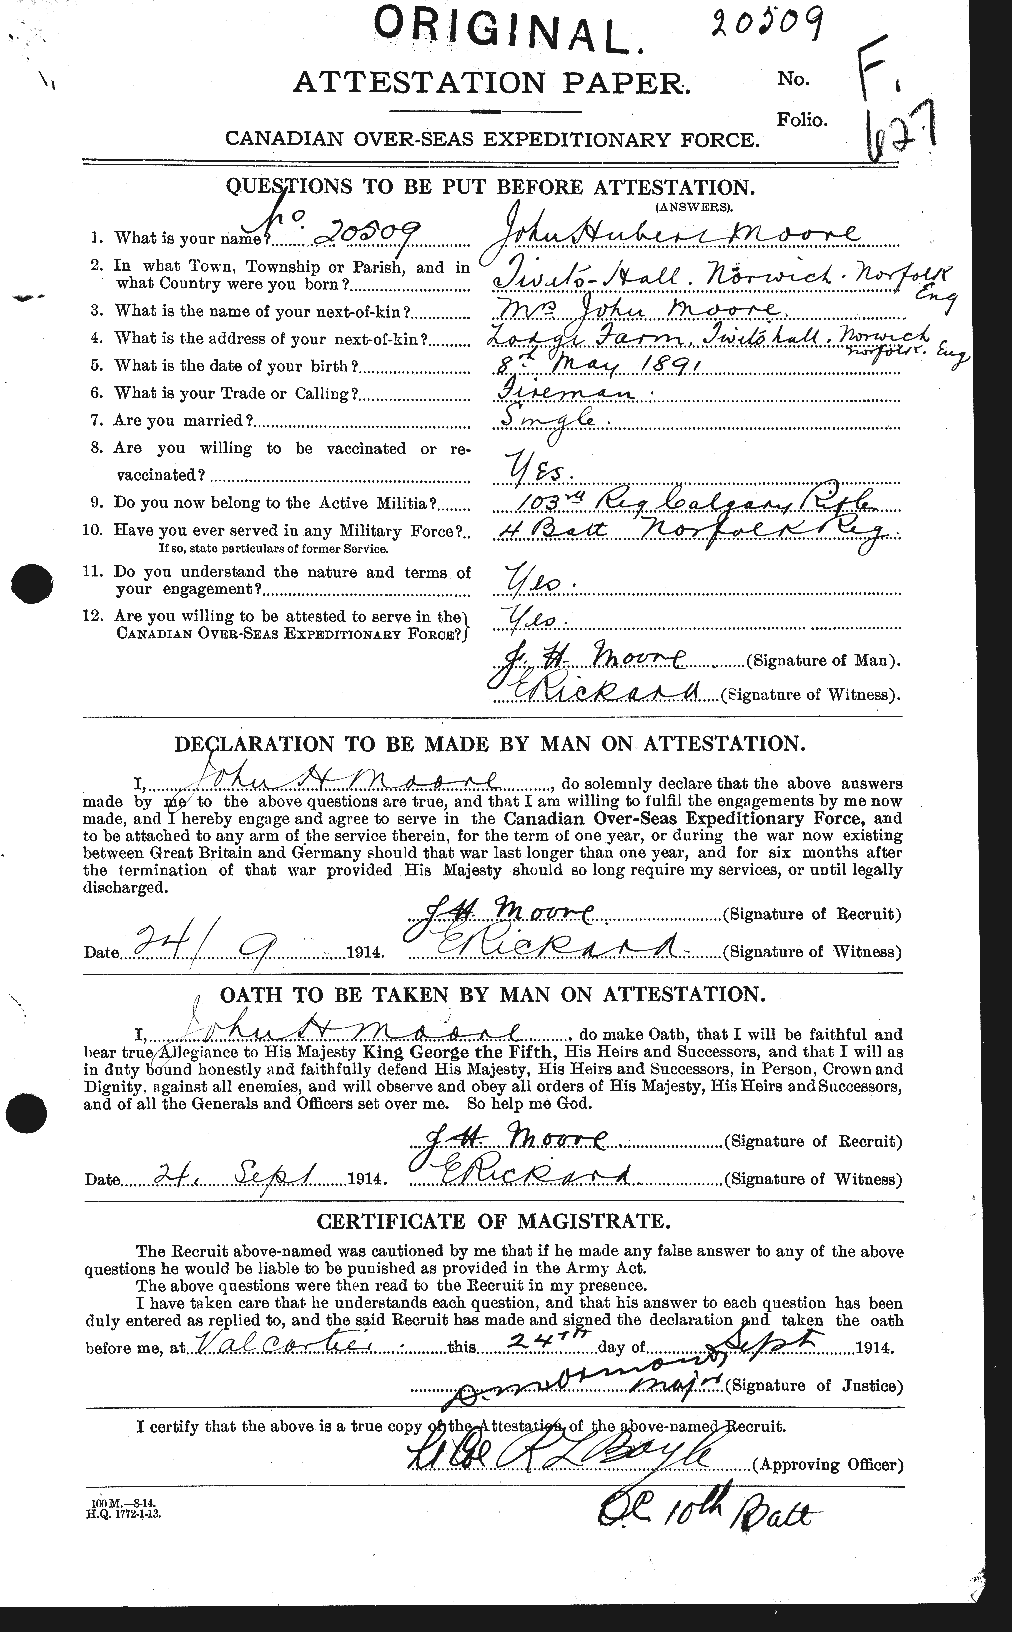 Personnel Records of the First World War - CEF 503299a